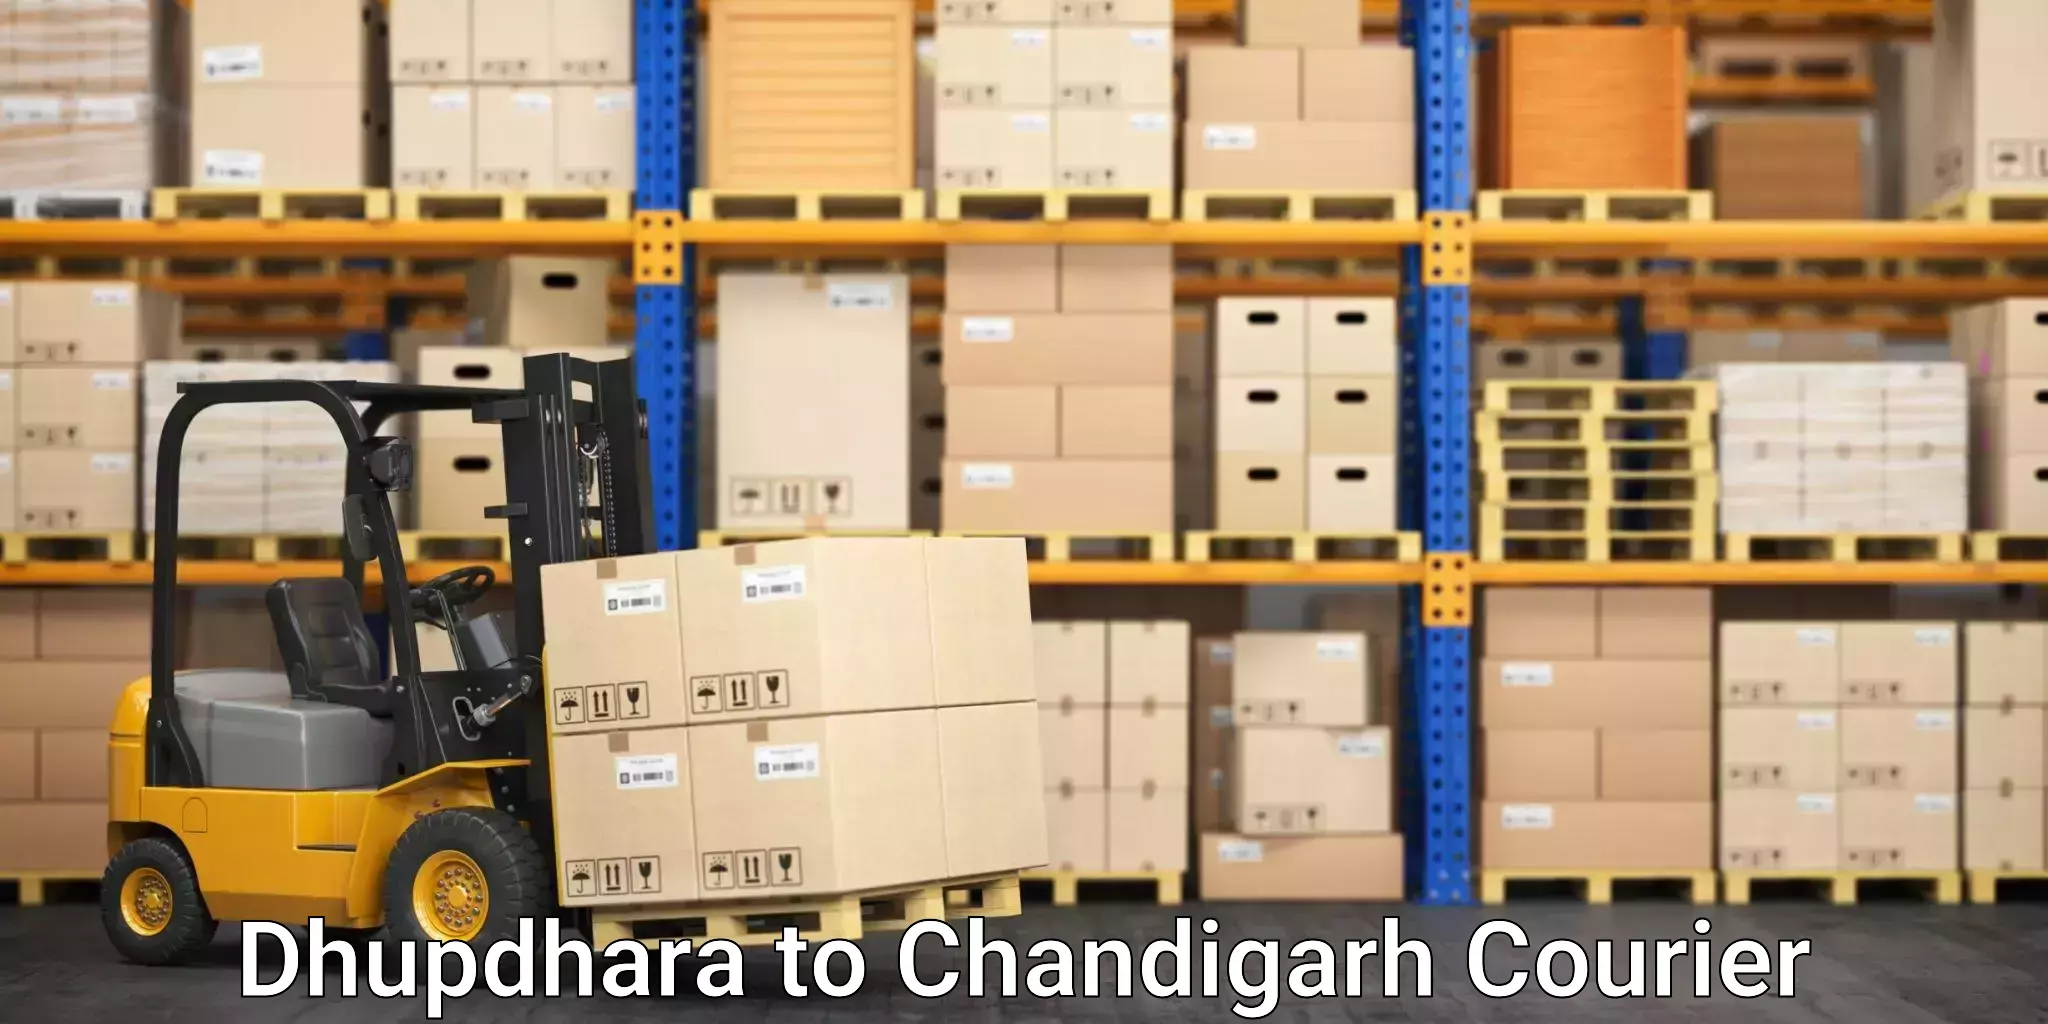 High value parcel delivery in Dhupdhara to Chandigarh